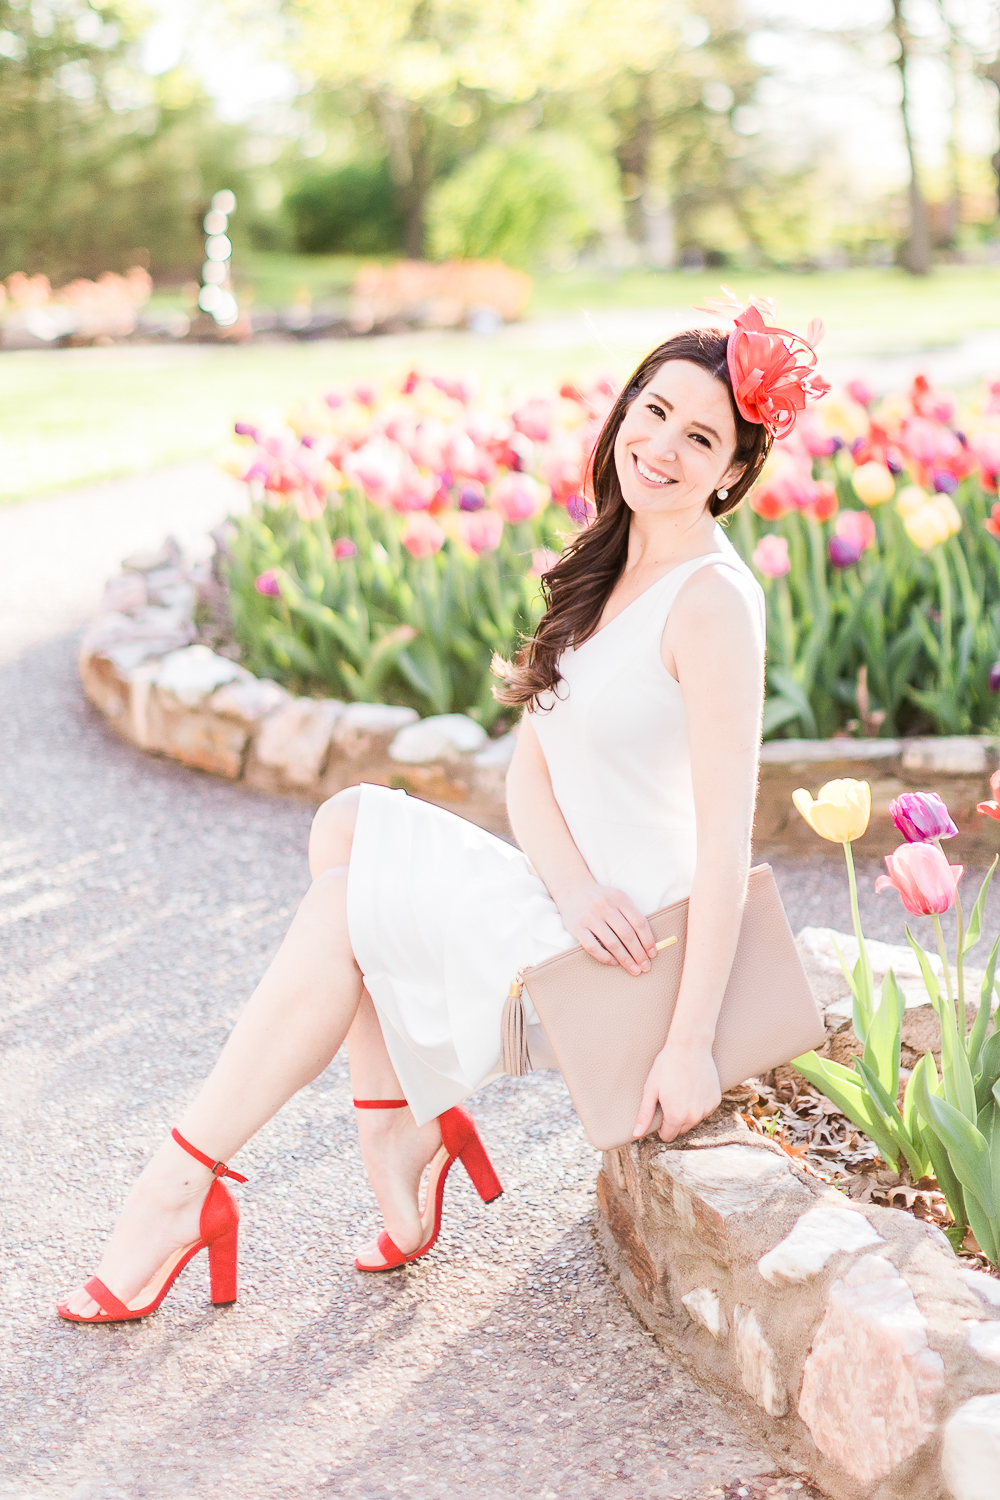 Maggie London Noreen Midi Dress styled with red fascinator headband, GiGi New York Uber Clutch, and red block heel sandals, Derby Day Style Guide: 3 Head-to-Toe Kentucky Derby Outfit Ideas by affordable fashion blogger Stephanie Ziajka from Diary of a Debutante